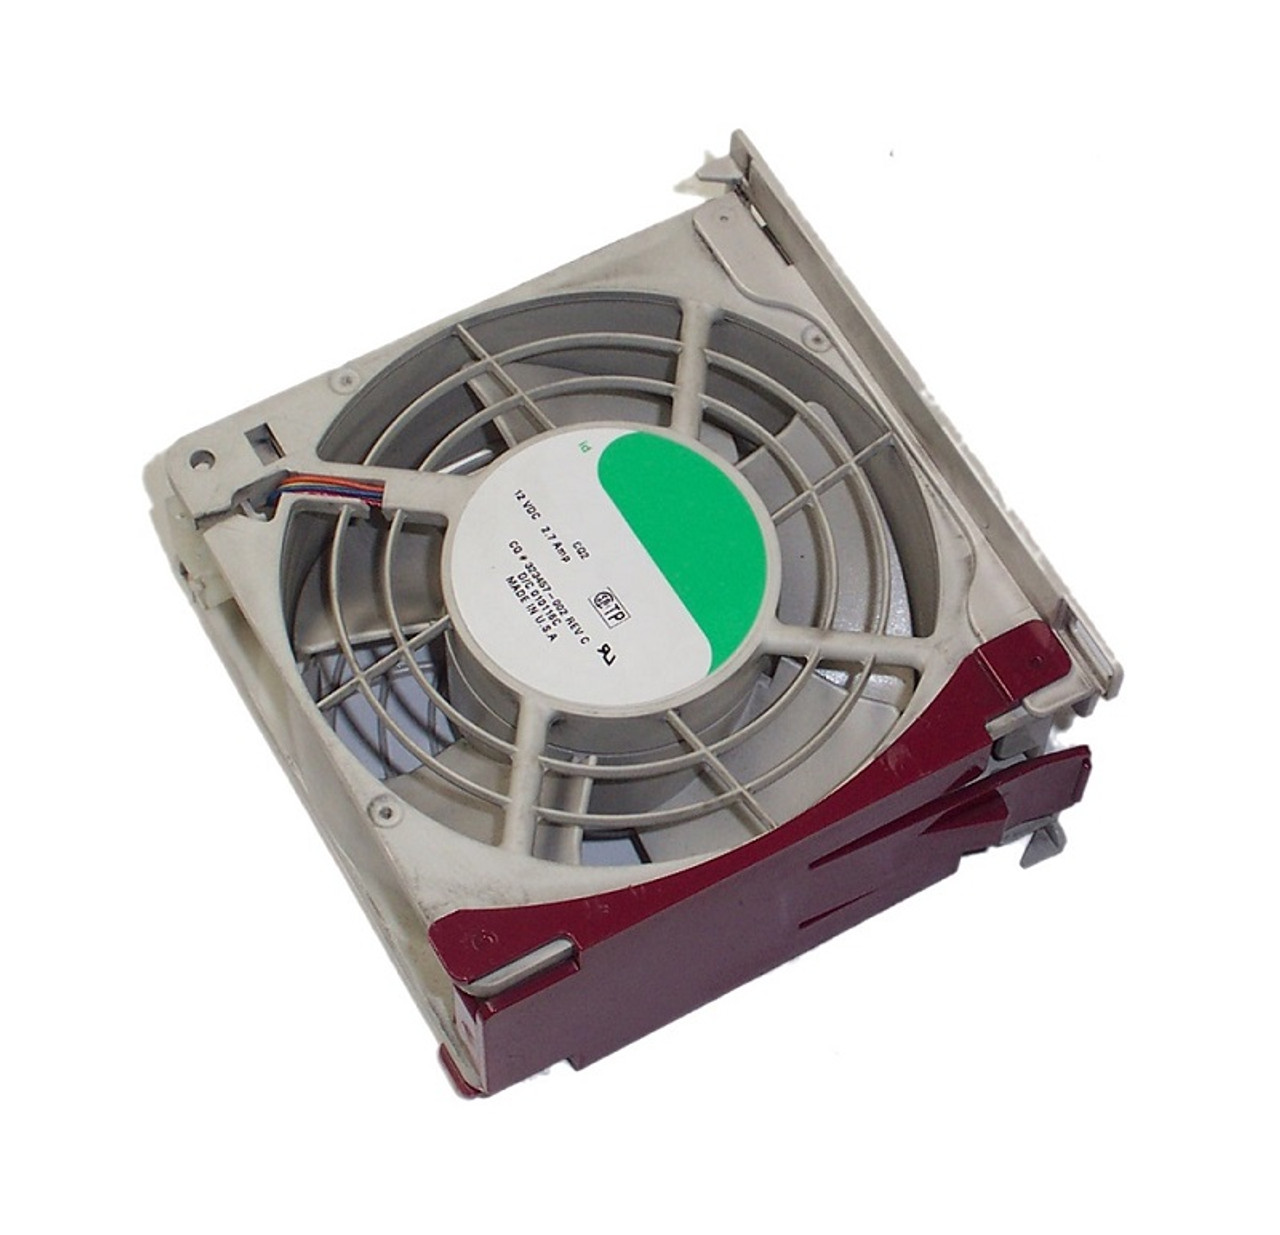 Y730D - Dell Memory Fan with Shroud for Precision Workstation T7500 Tower